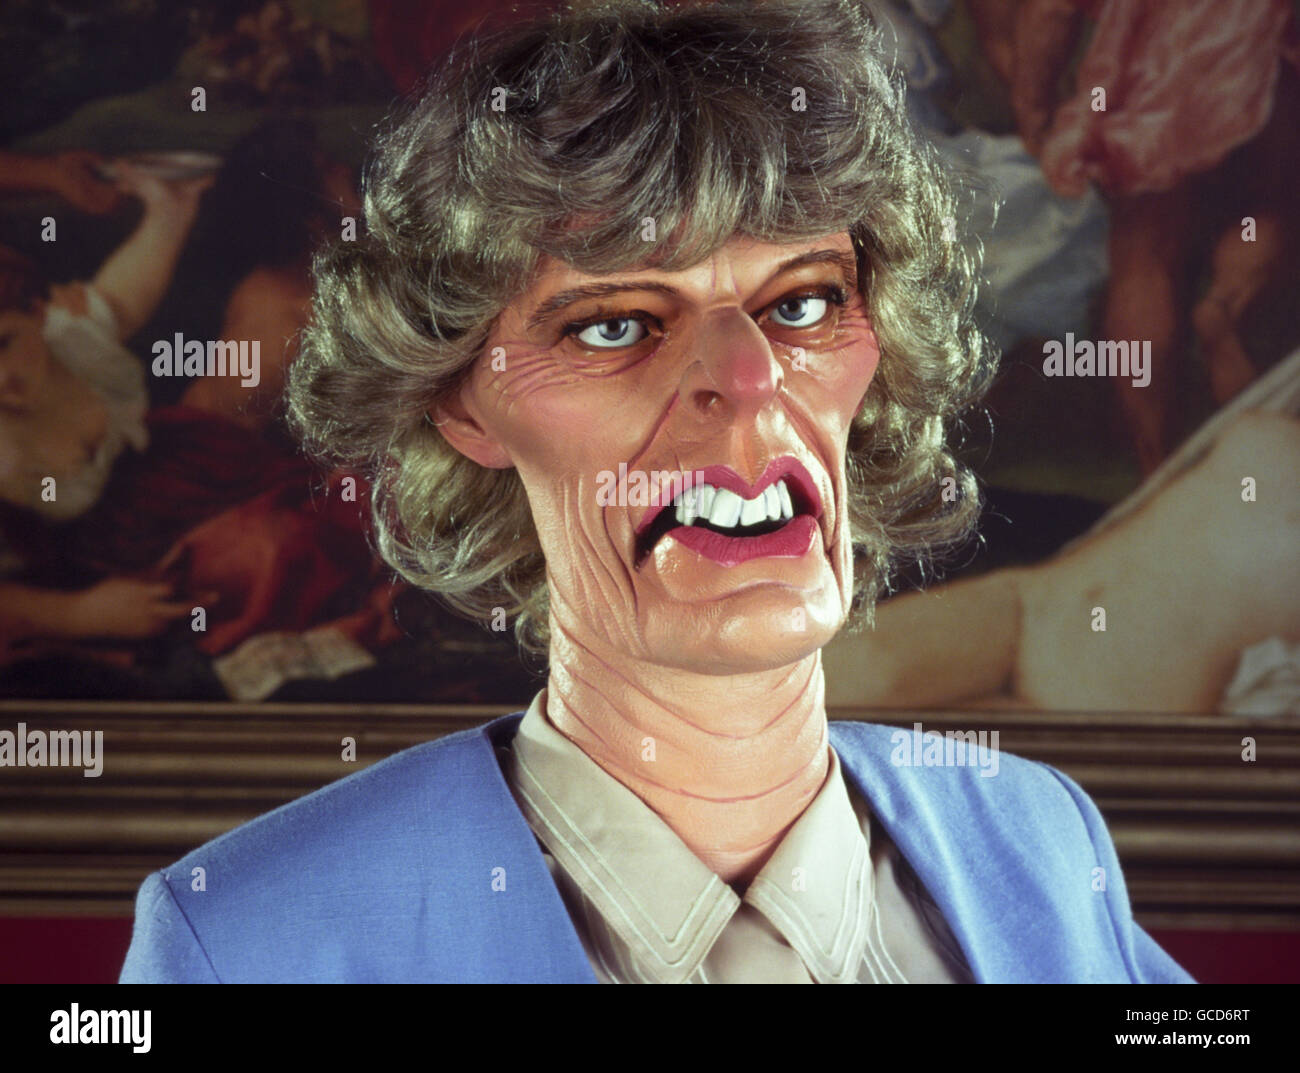 THE SPITTING IMAGE PUPPET OF CAMILLA PARKER-BOWLES FEATURED IN THE SATIRICAL ITV SERIES. Stock Photo